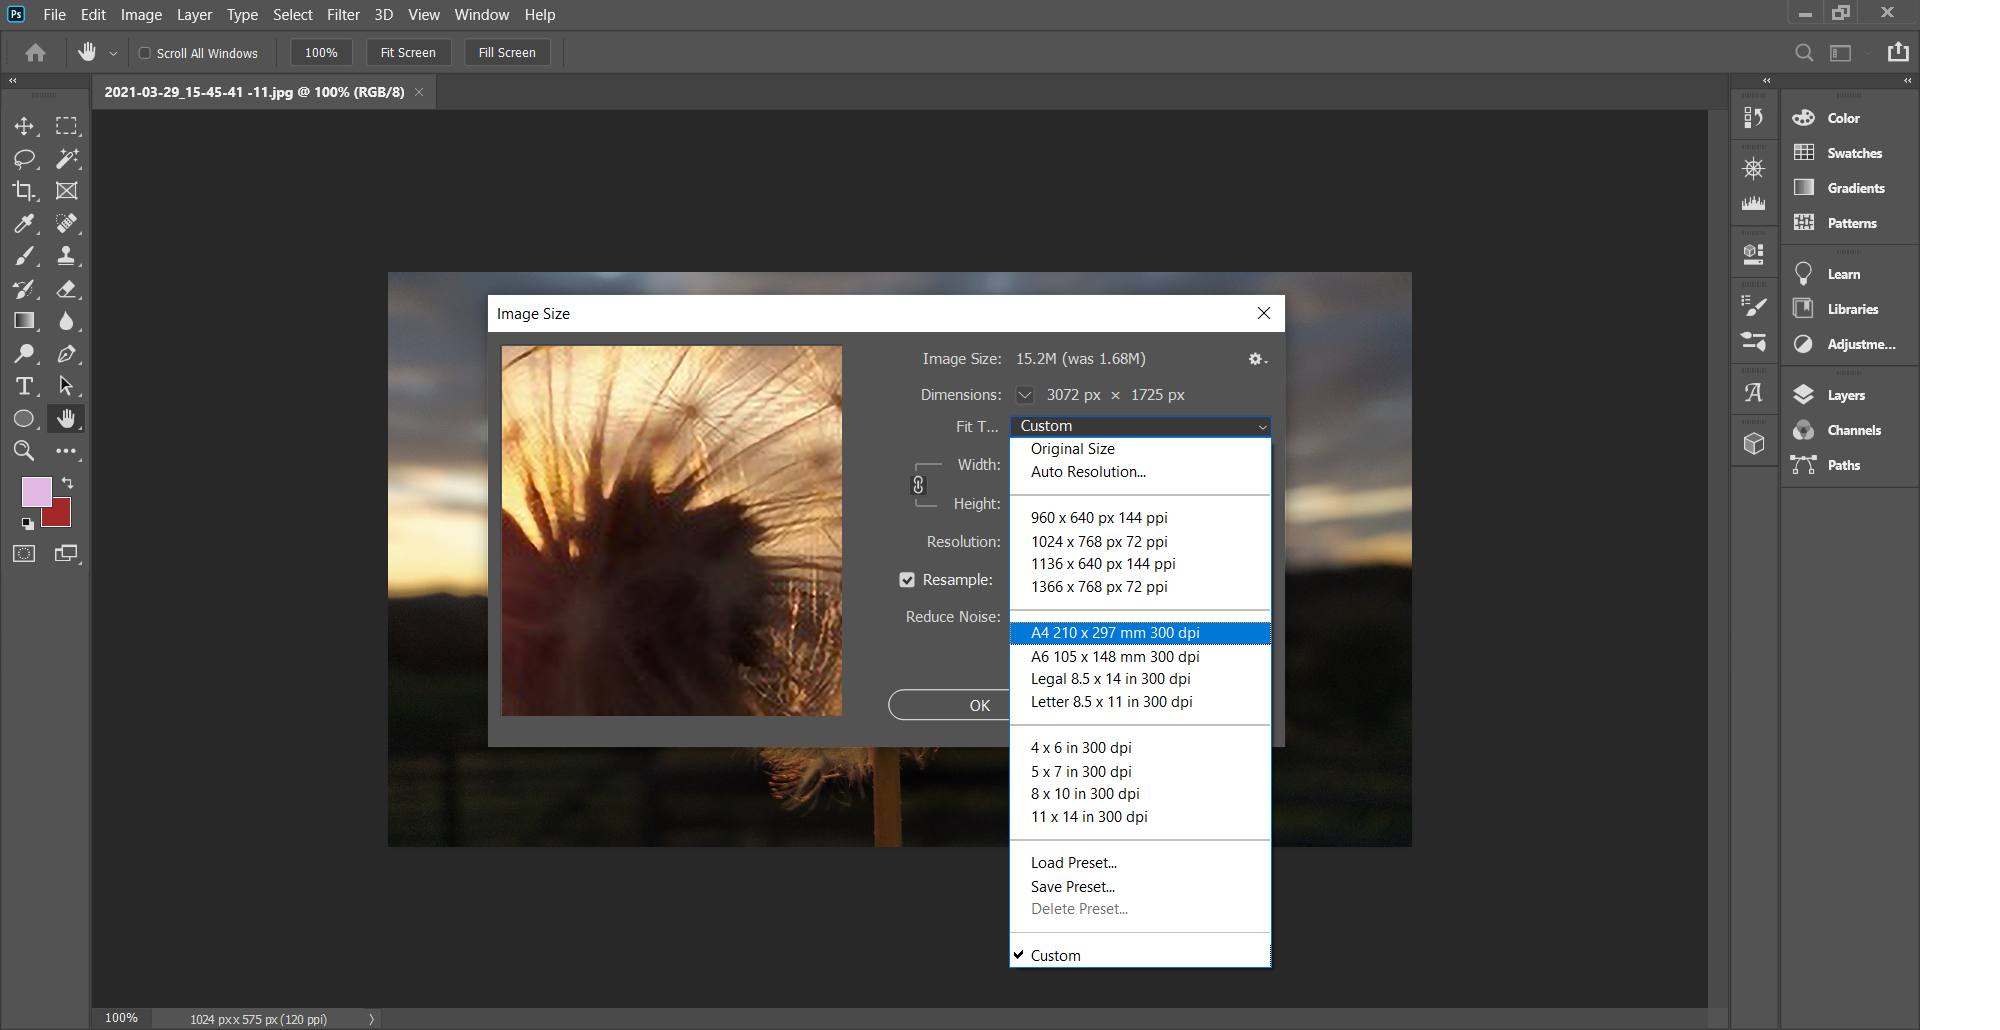 Convert low resolution image to high resolution in Photoshop